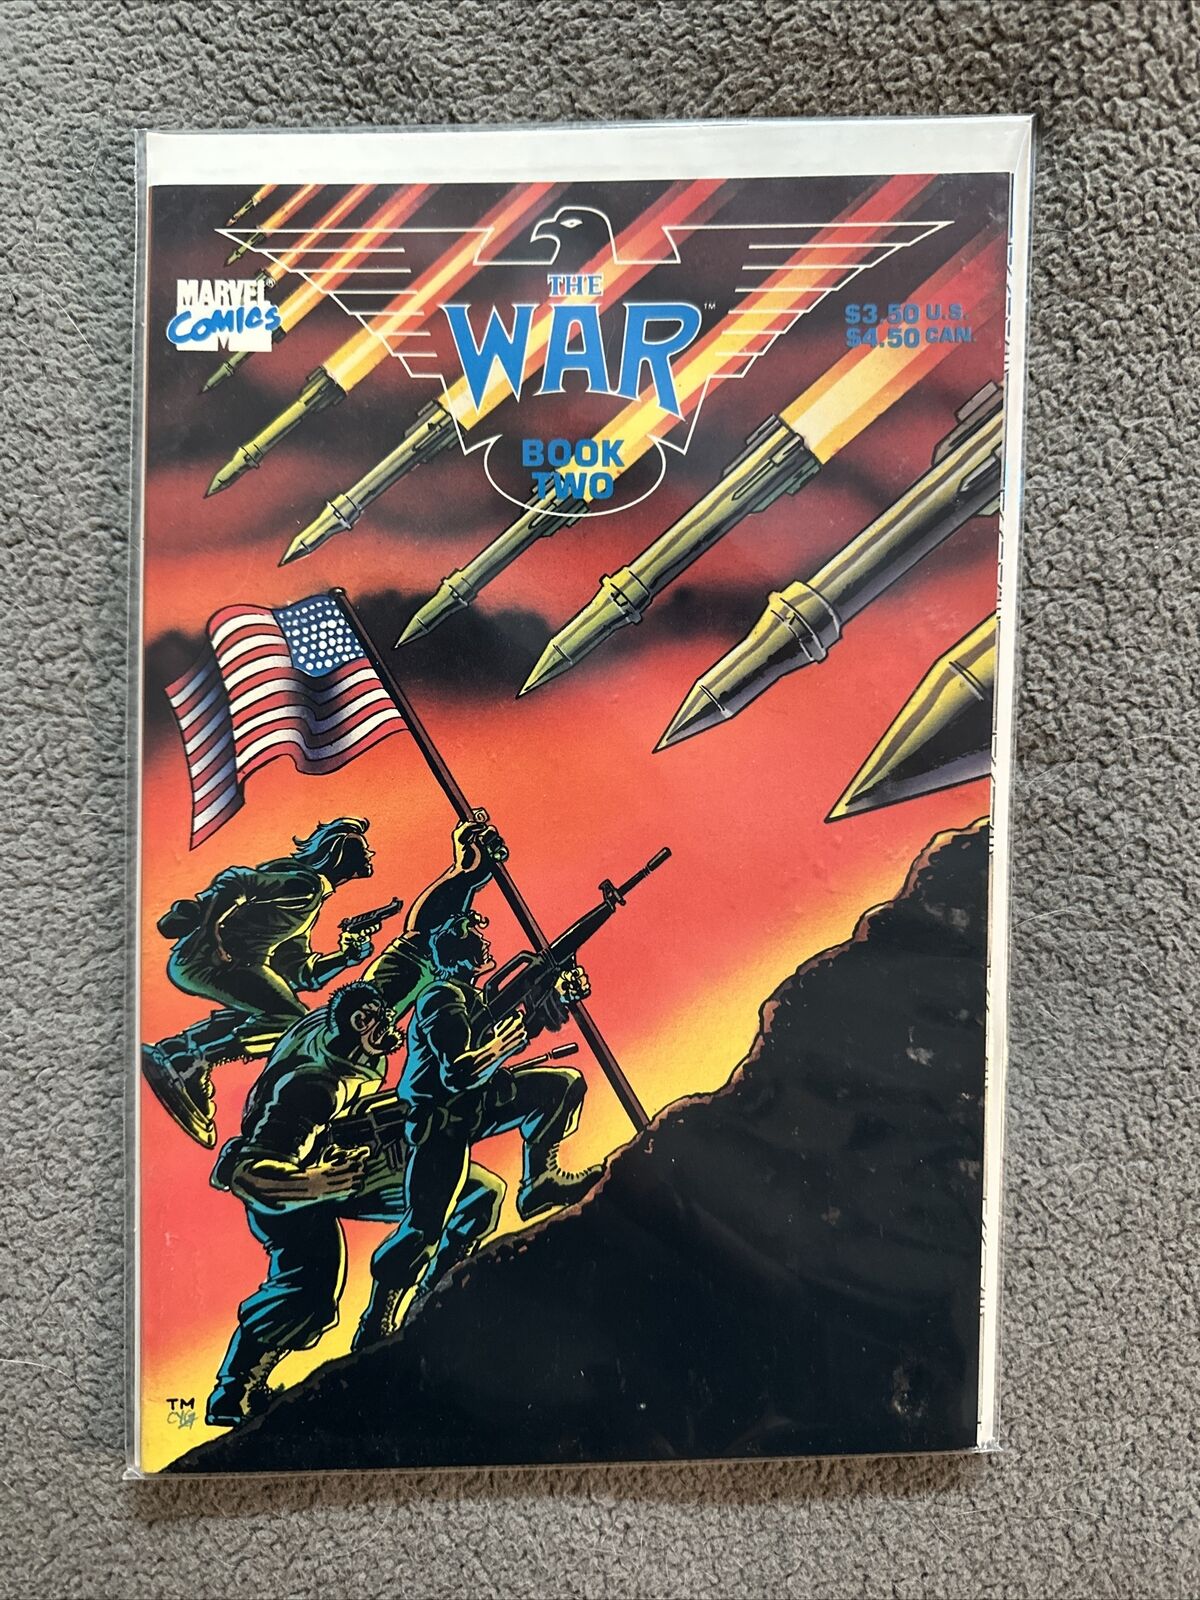 The War, Book Two #2 Marvel Comics (1989) M88